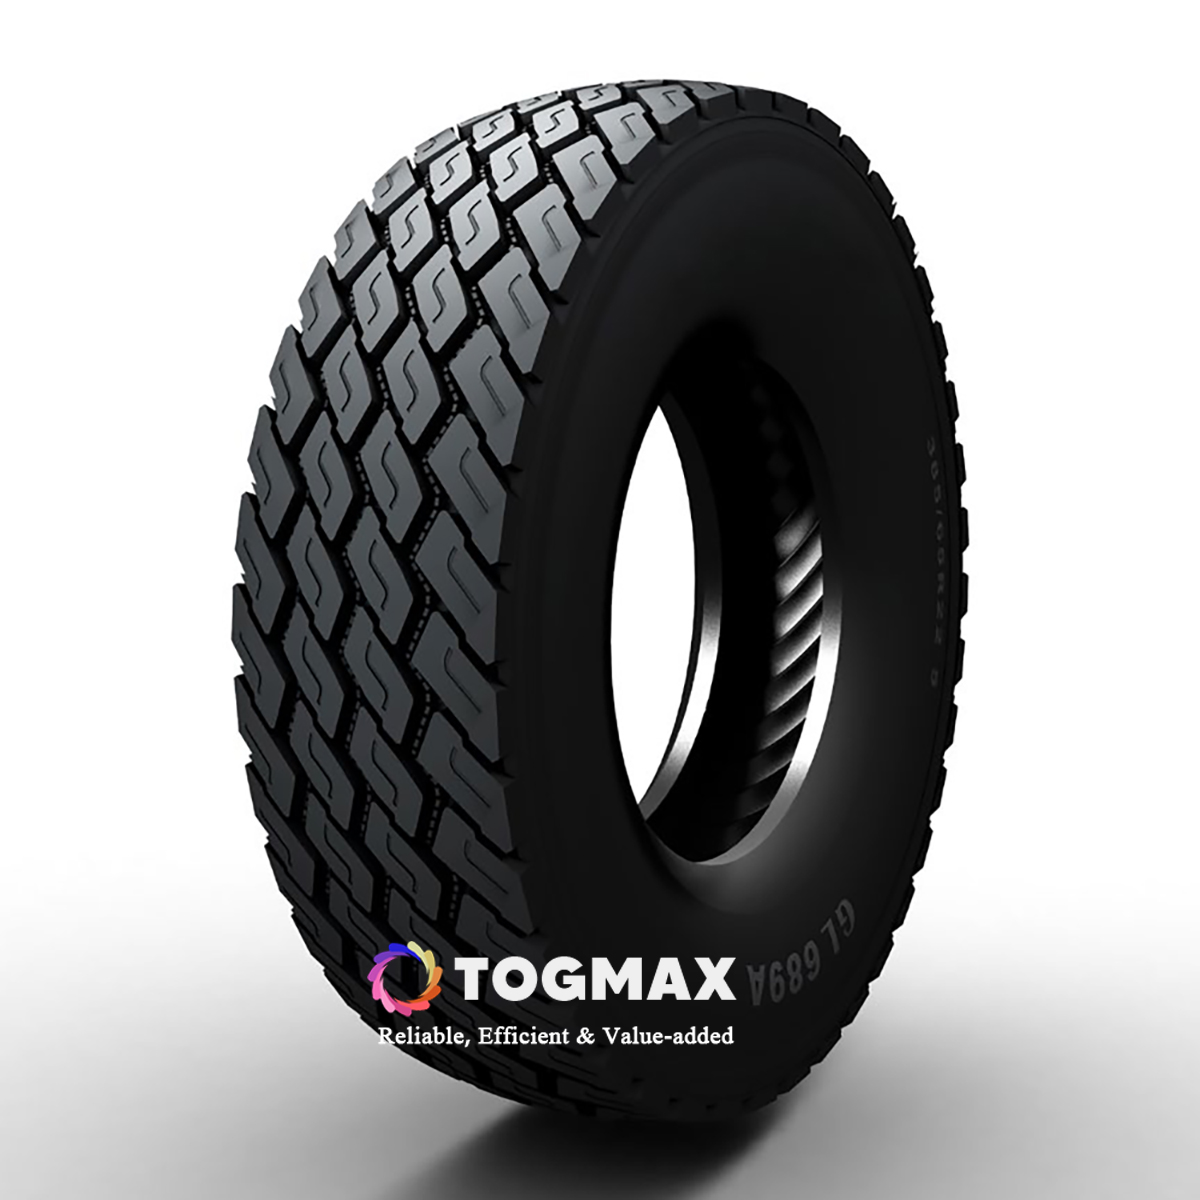 Advance Truck Tyre GL689A 385/65R22.5, 425/65R22.5 Made in Vietnam Factory